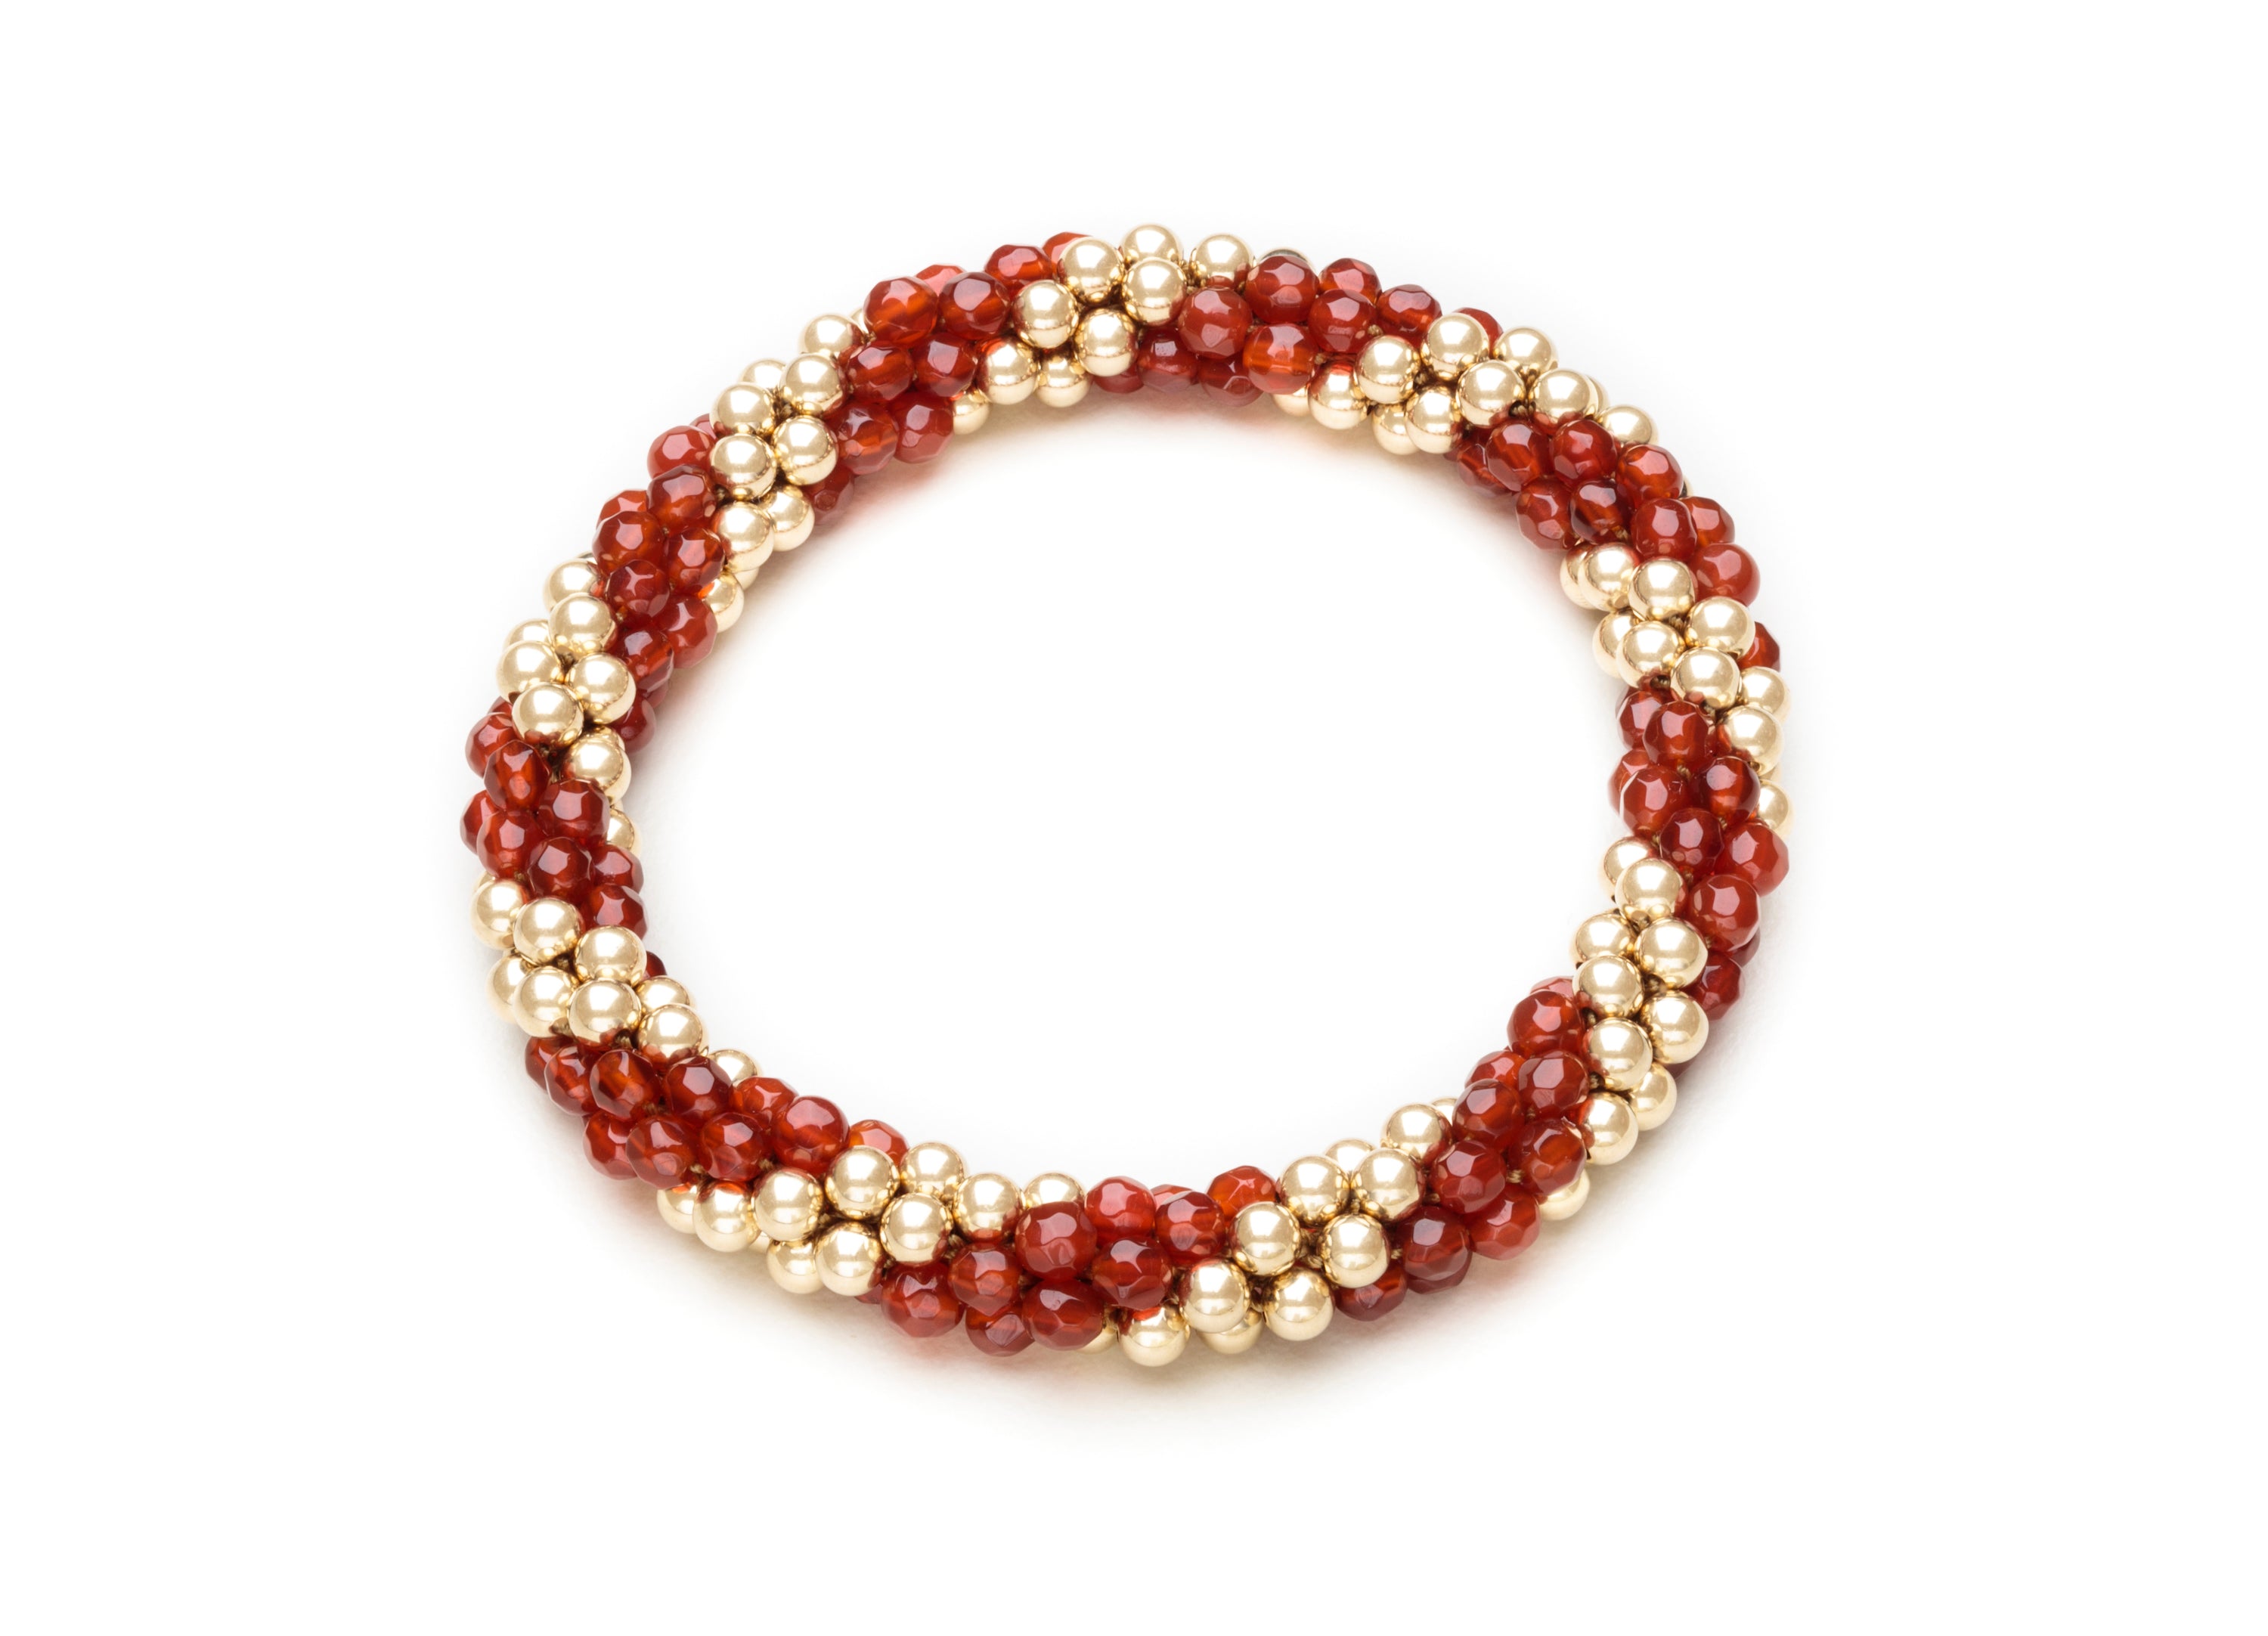 4mm Cluster Bracelets, Gold and Semiprecious Spiral Pattern, (Click to View All)